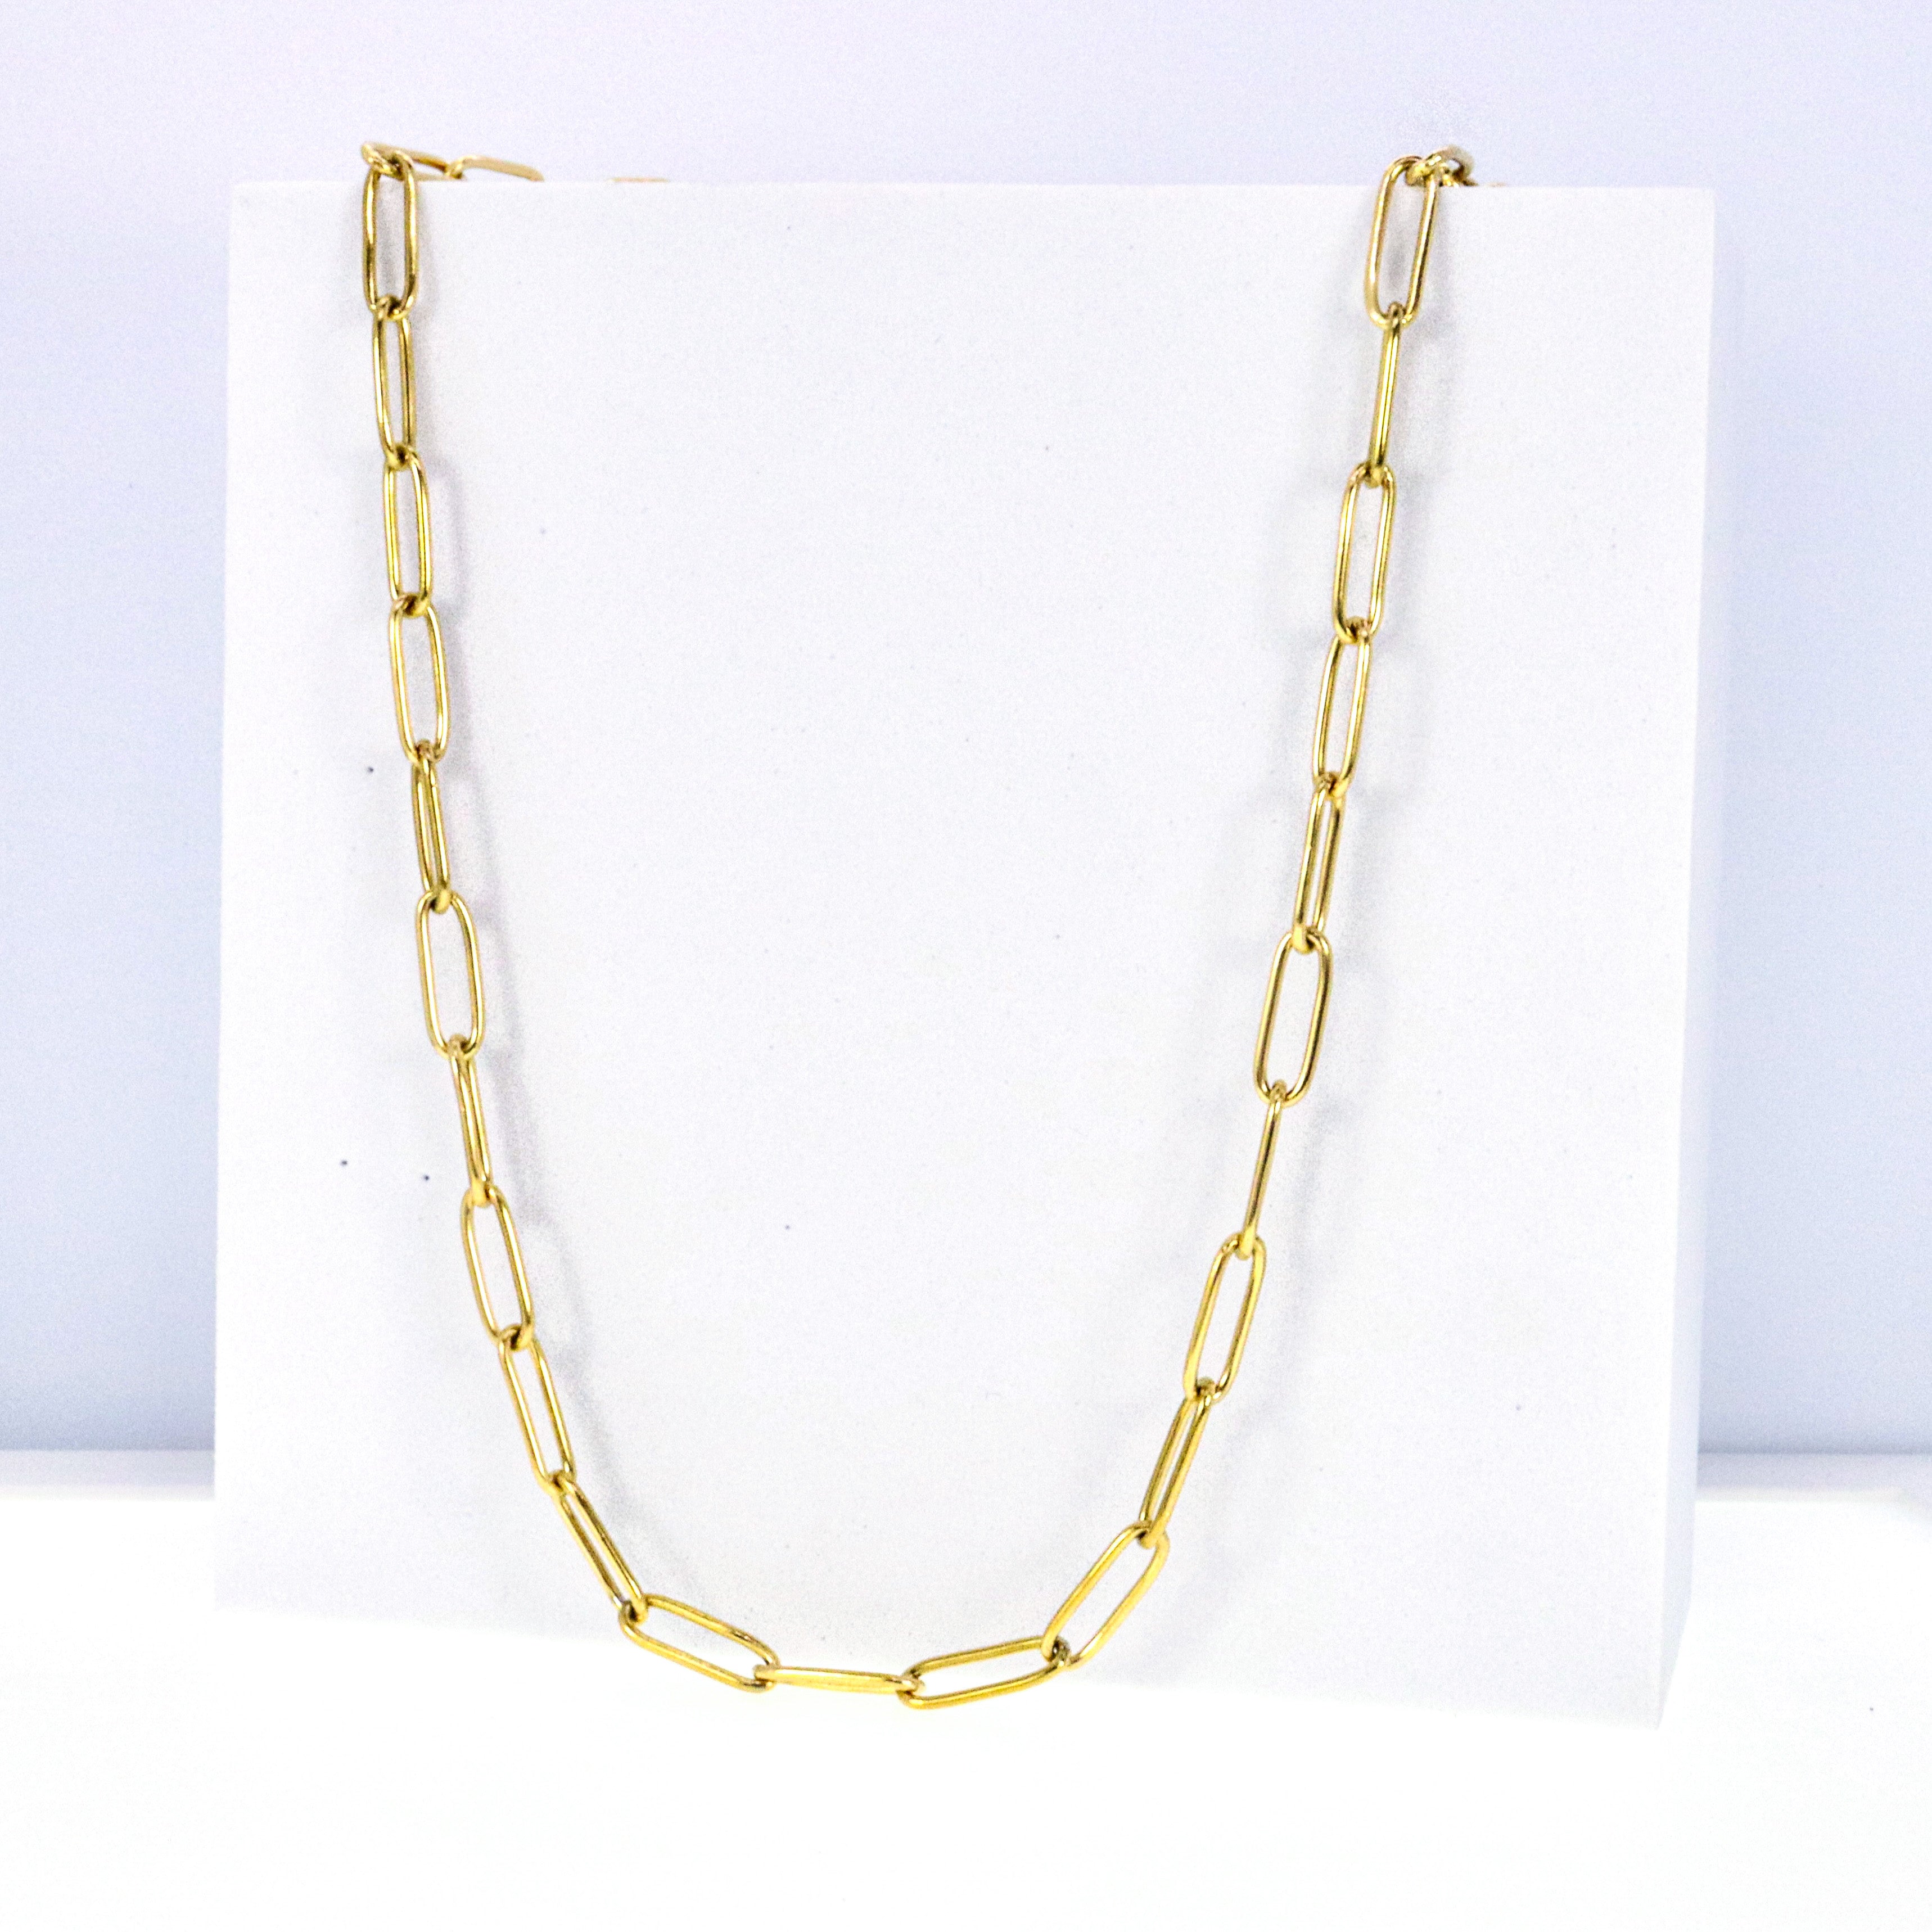 Flower Toggle Clasp Staple Chain Necklace